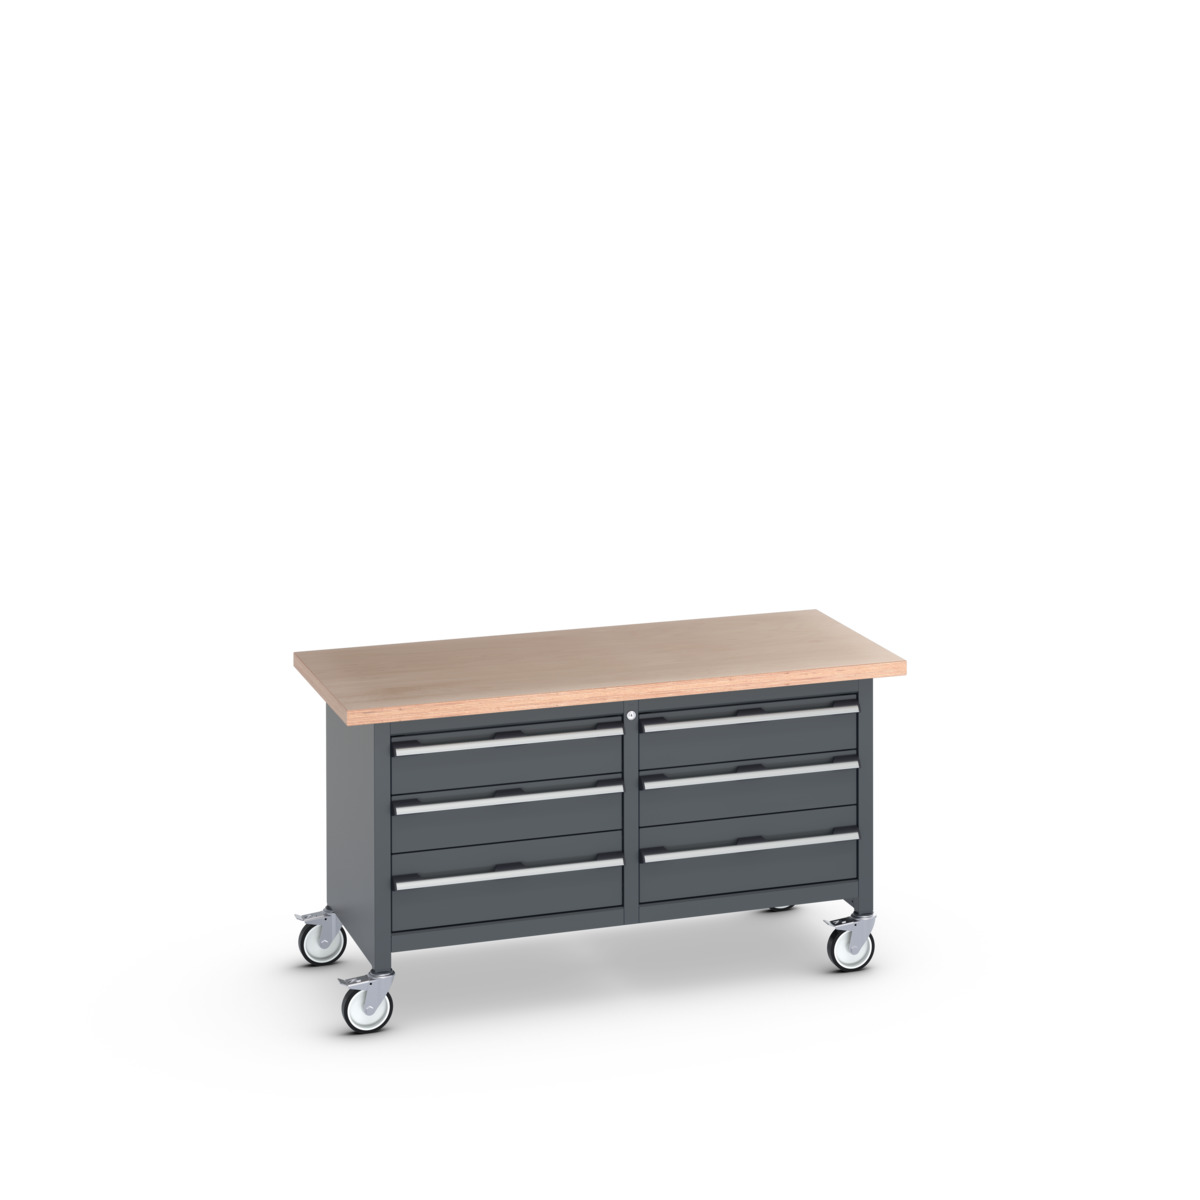 41002106.77V - cubio mobile storage bench (mpx)